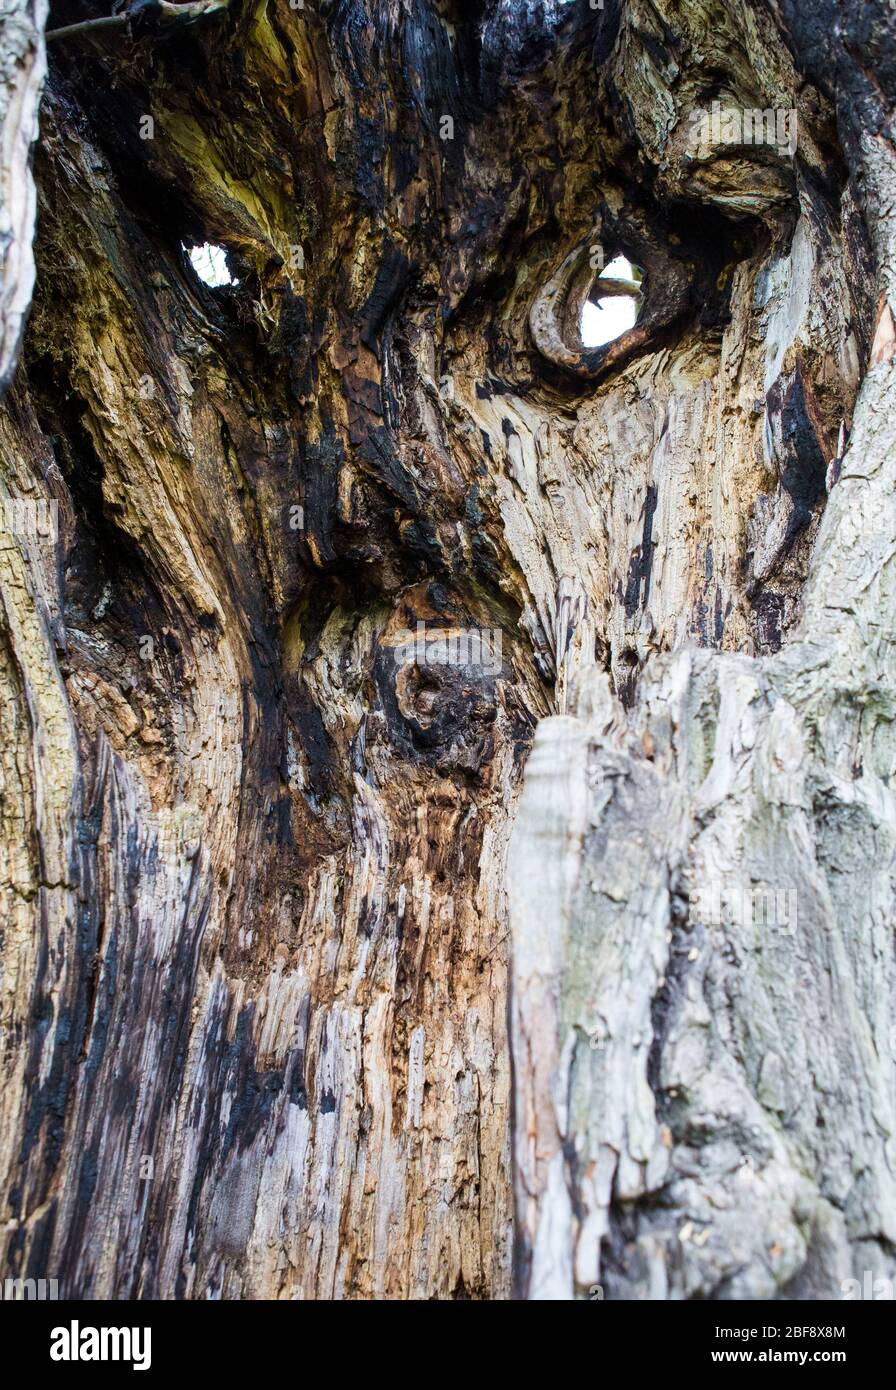 Ancient tree with face in the trunk Stock Photo